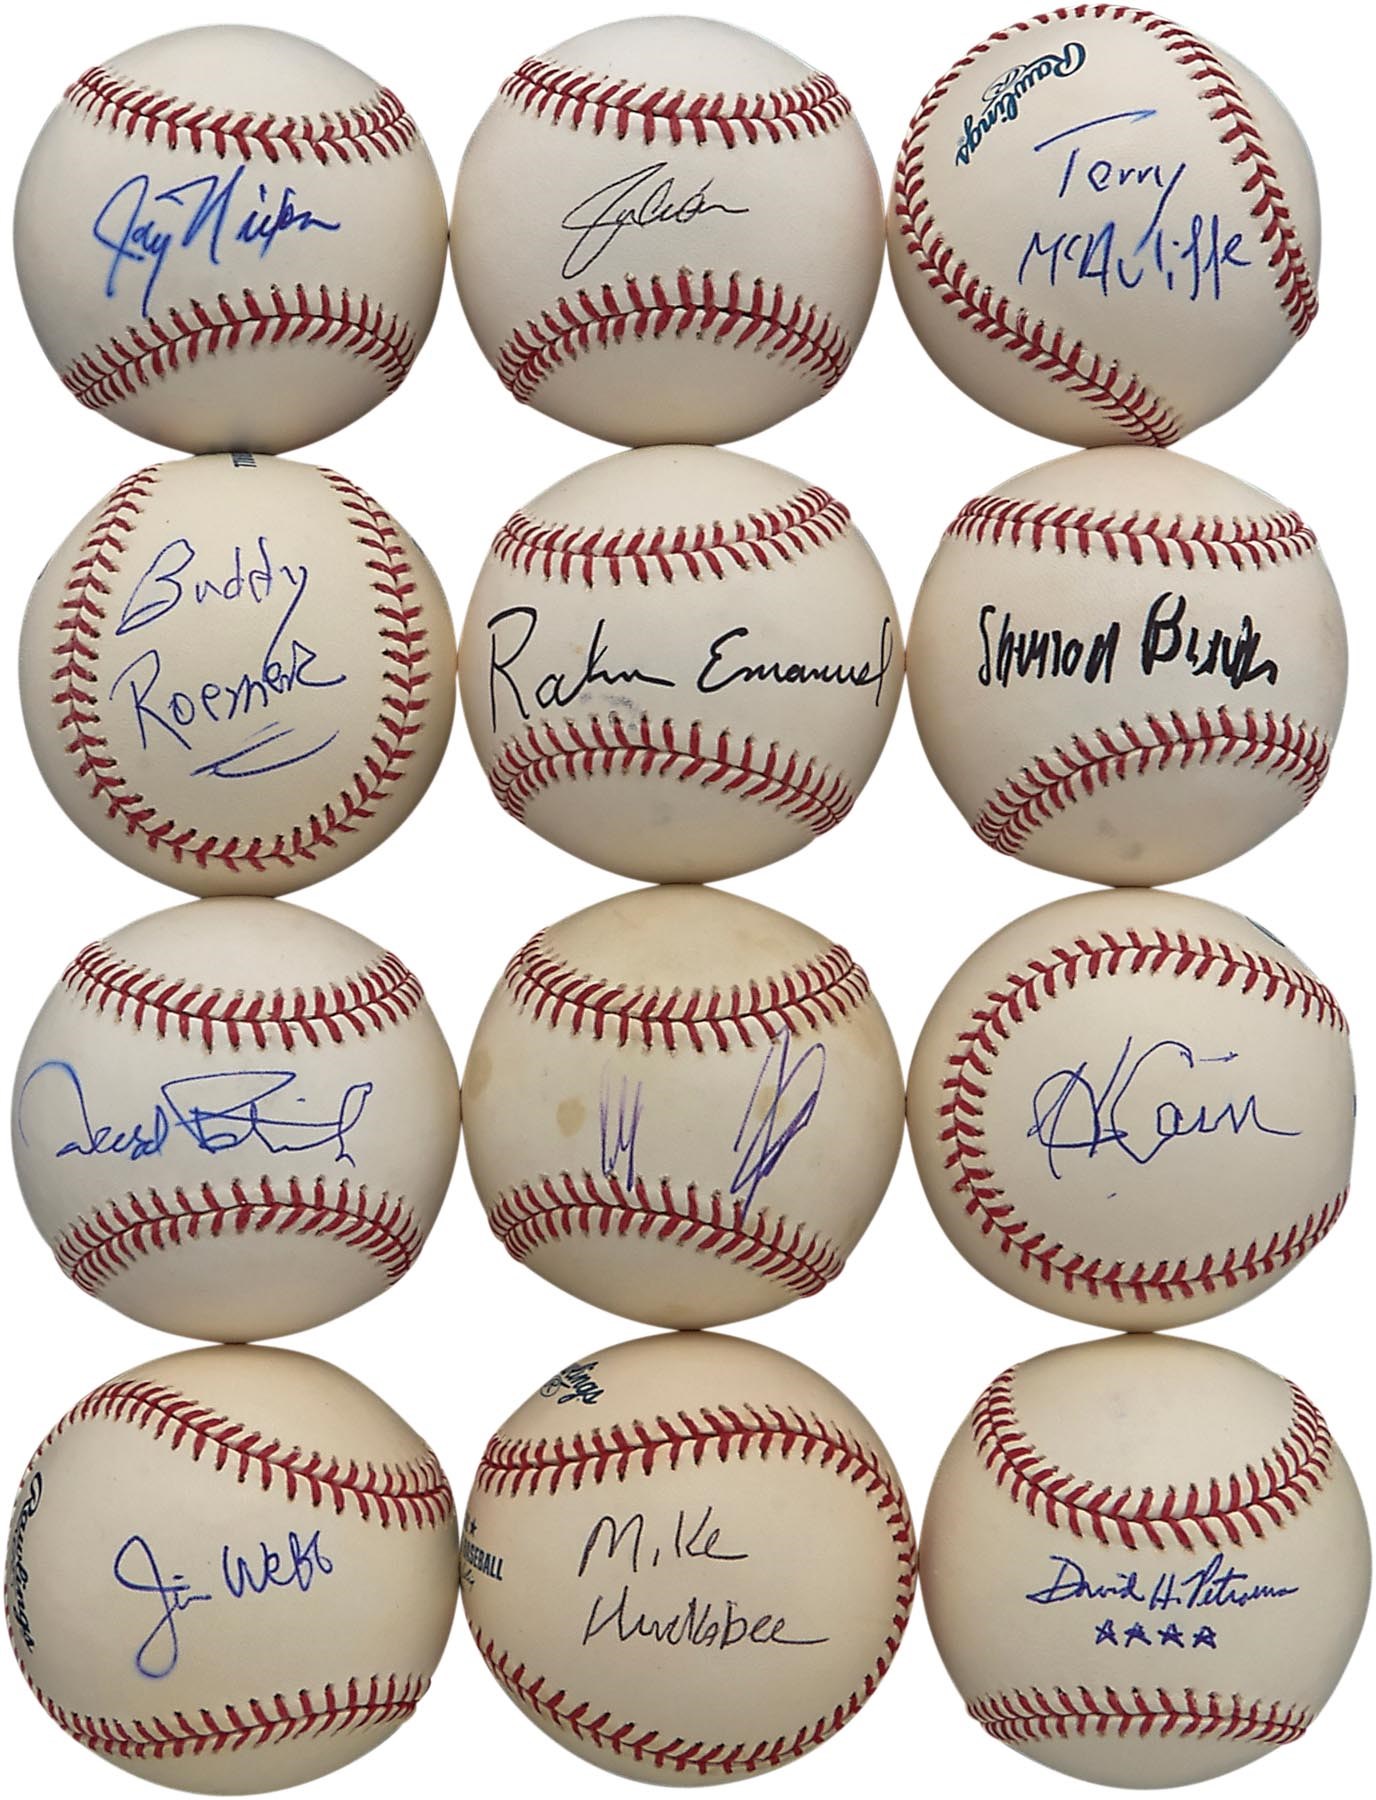 - Heads of State & Major Political Figures Signed Baseballs From The Legendary Kaplan Collection (78)